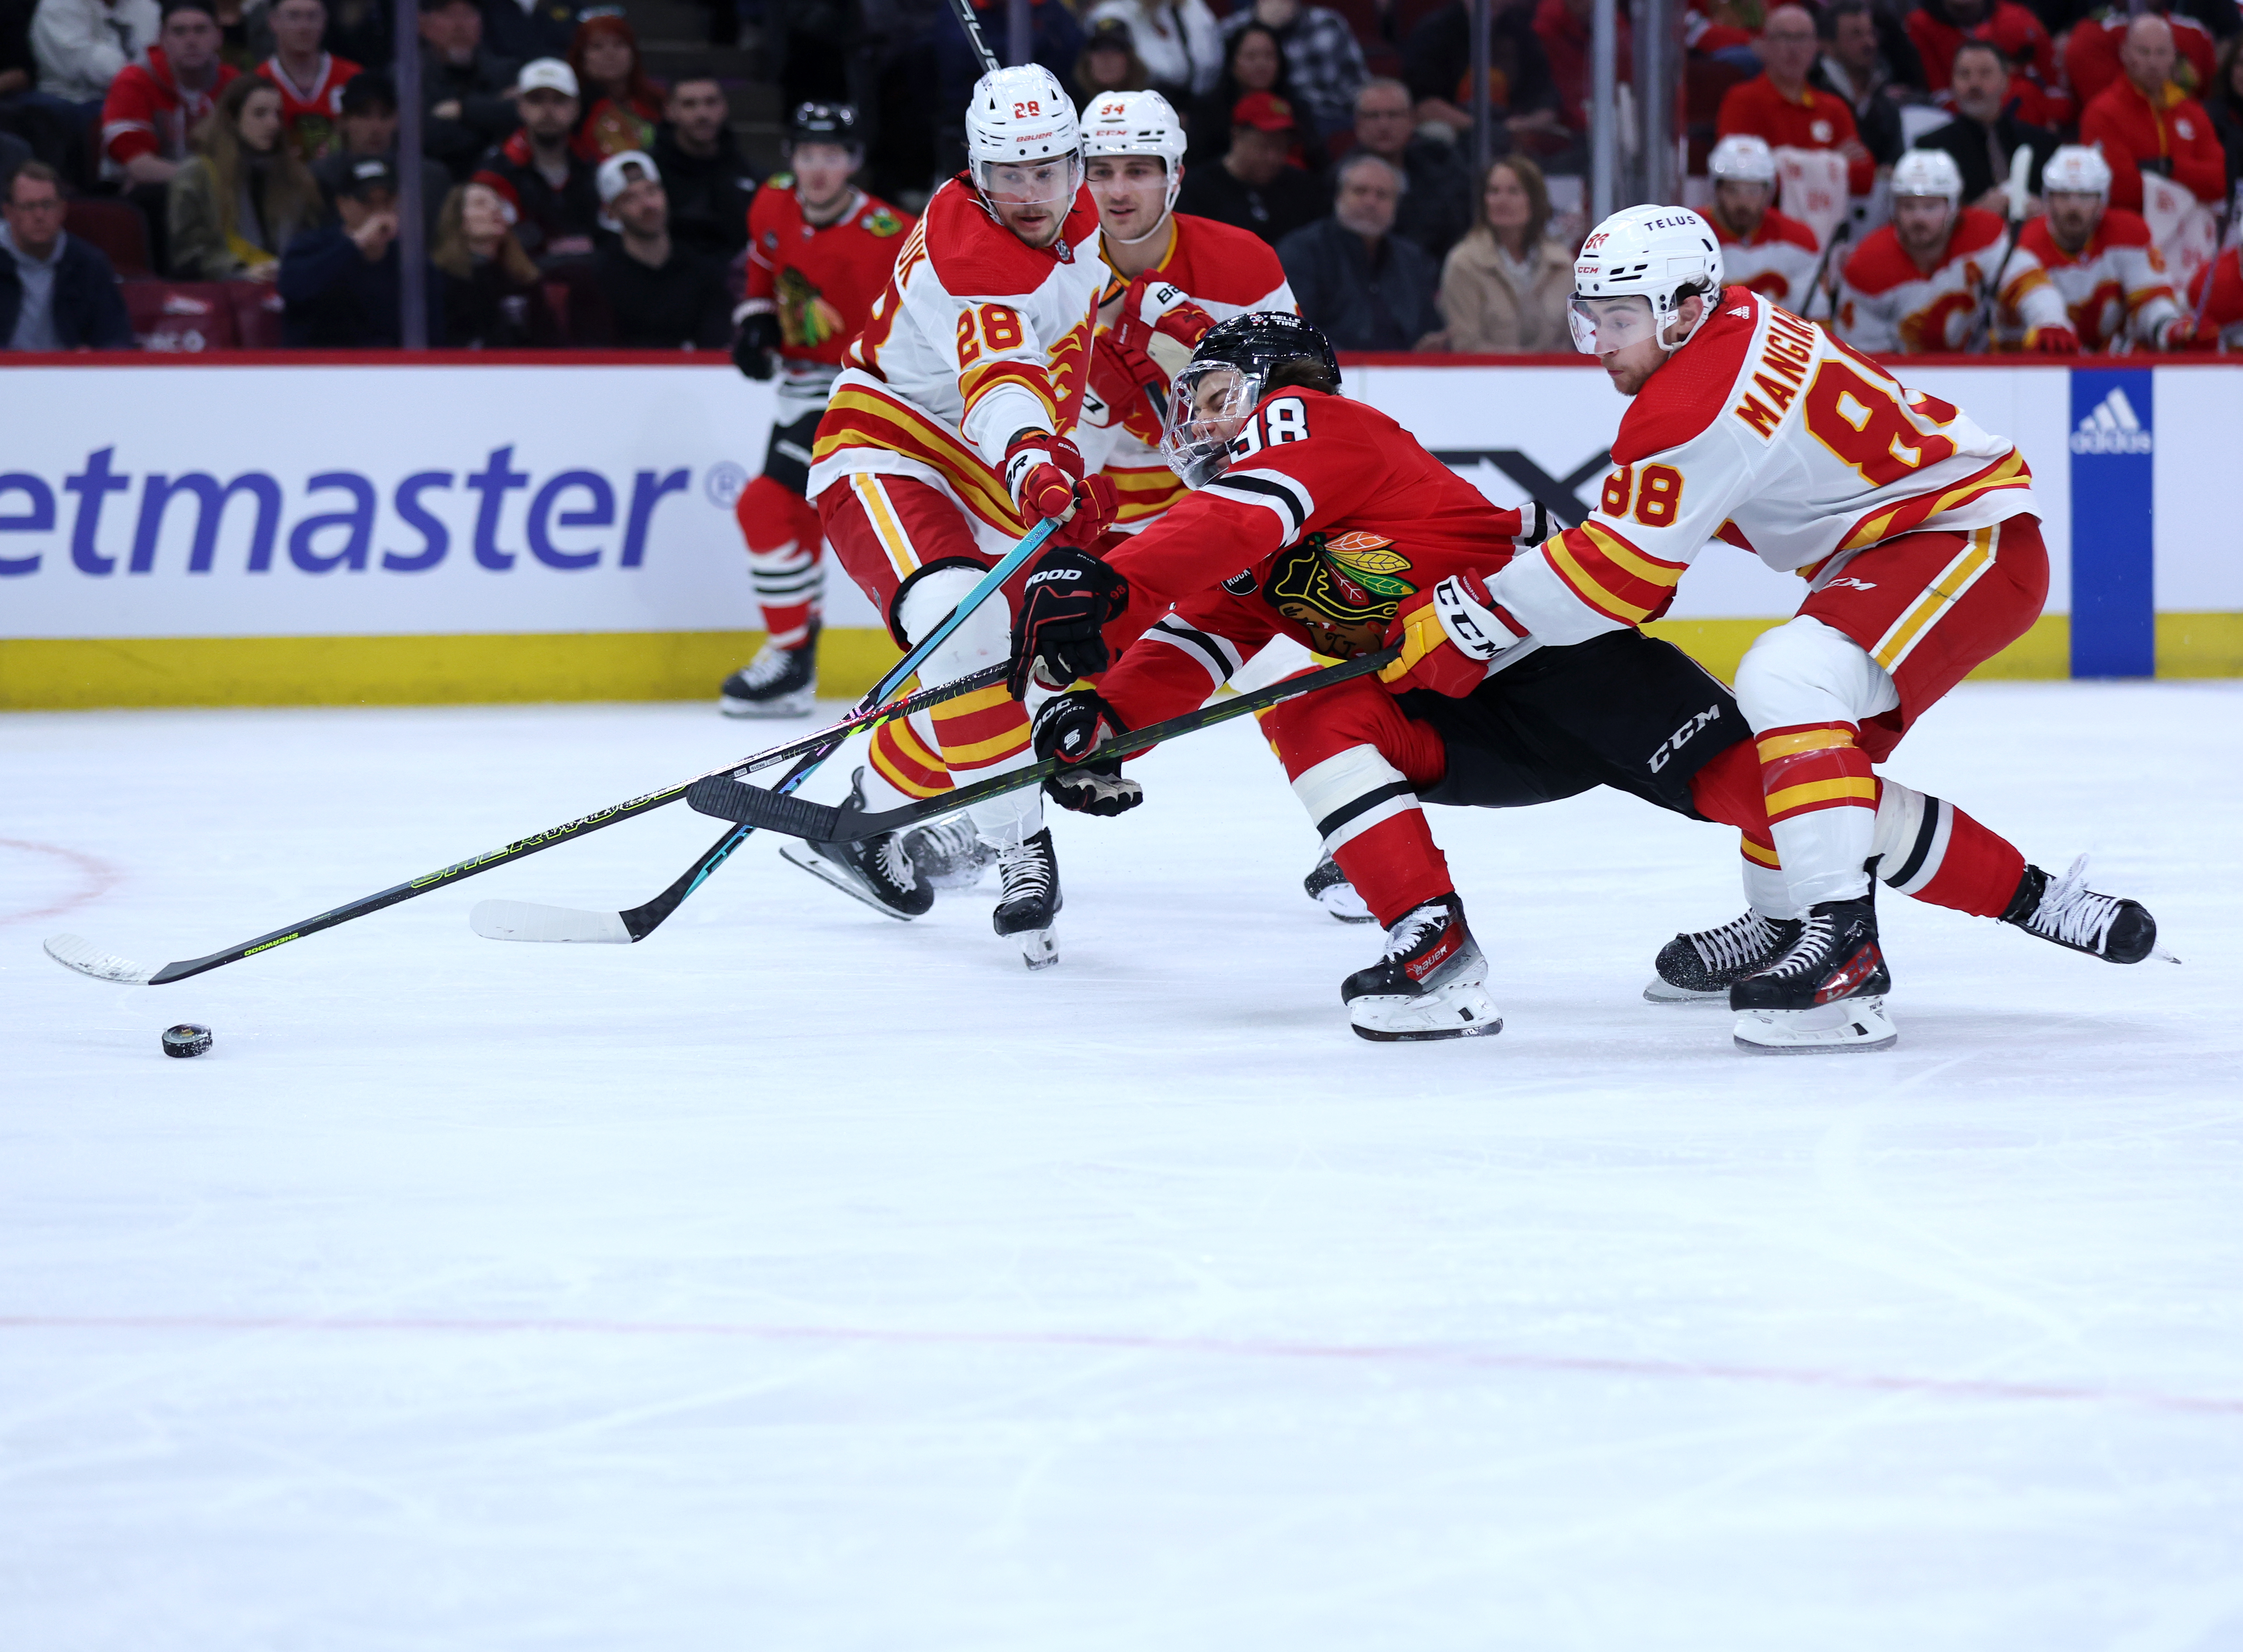 Chicago Blackhawks center Connor Bedard (98) battles Calgary Flames defenseman Nikita Okhotiuk (28) and left wing Andrew Mangiapane (88) in the first period of a game at the United Center in Chicago on March 26, 2024. (Chris Sweda/Chicago Tribune)